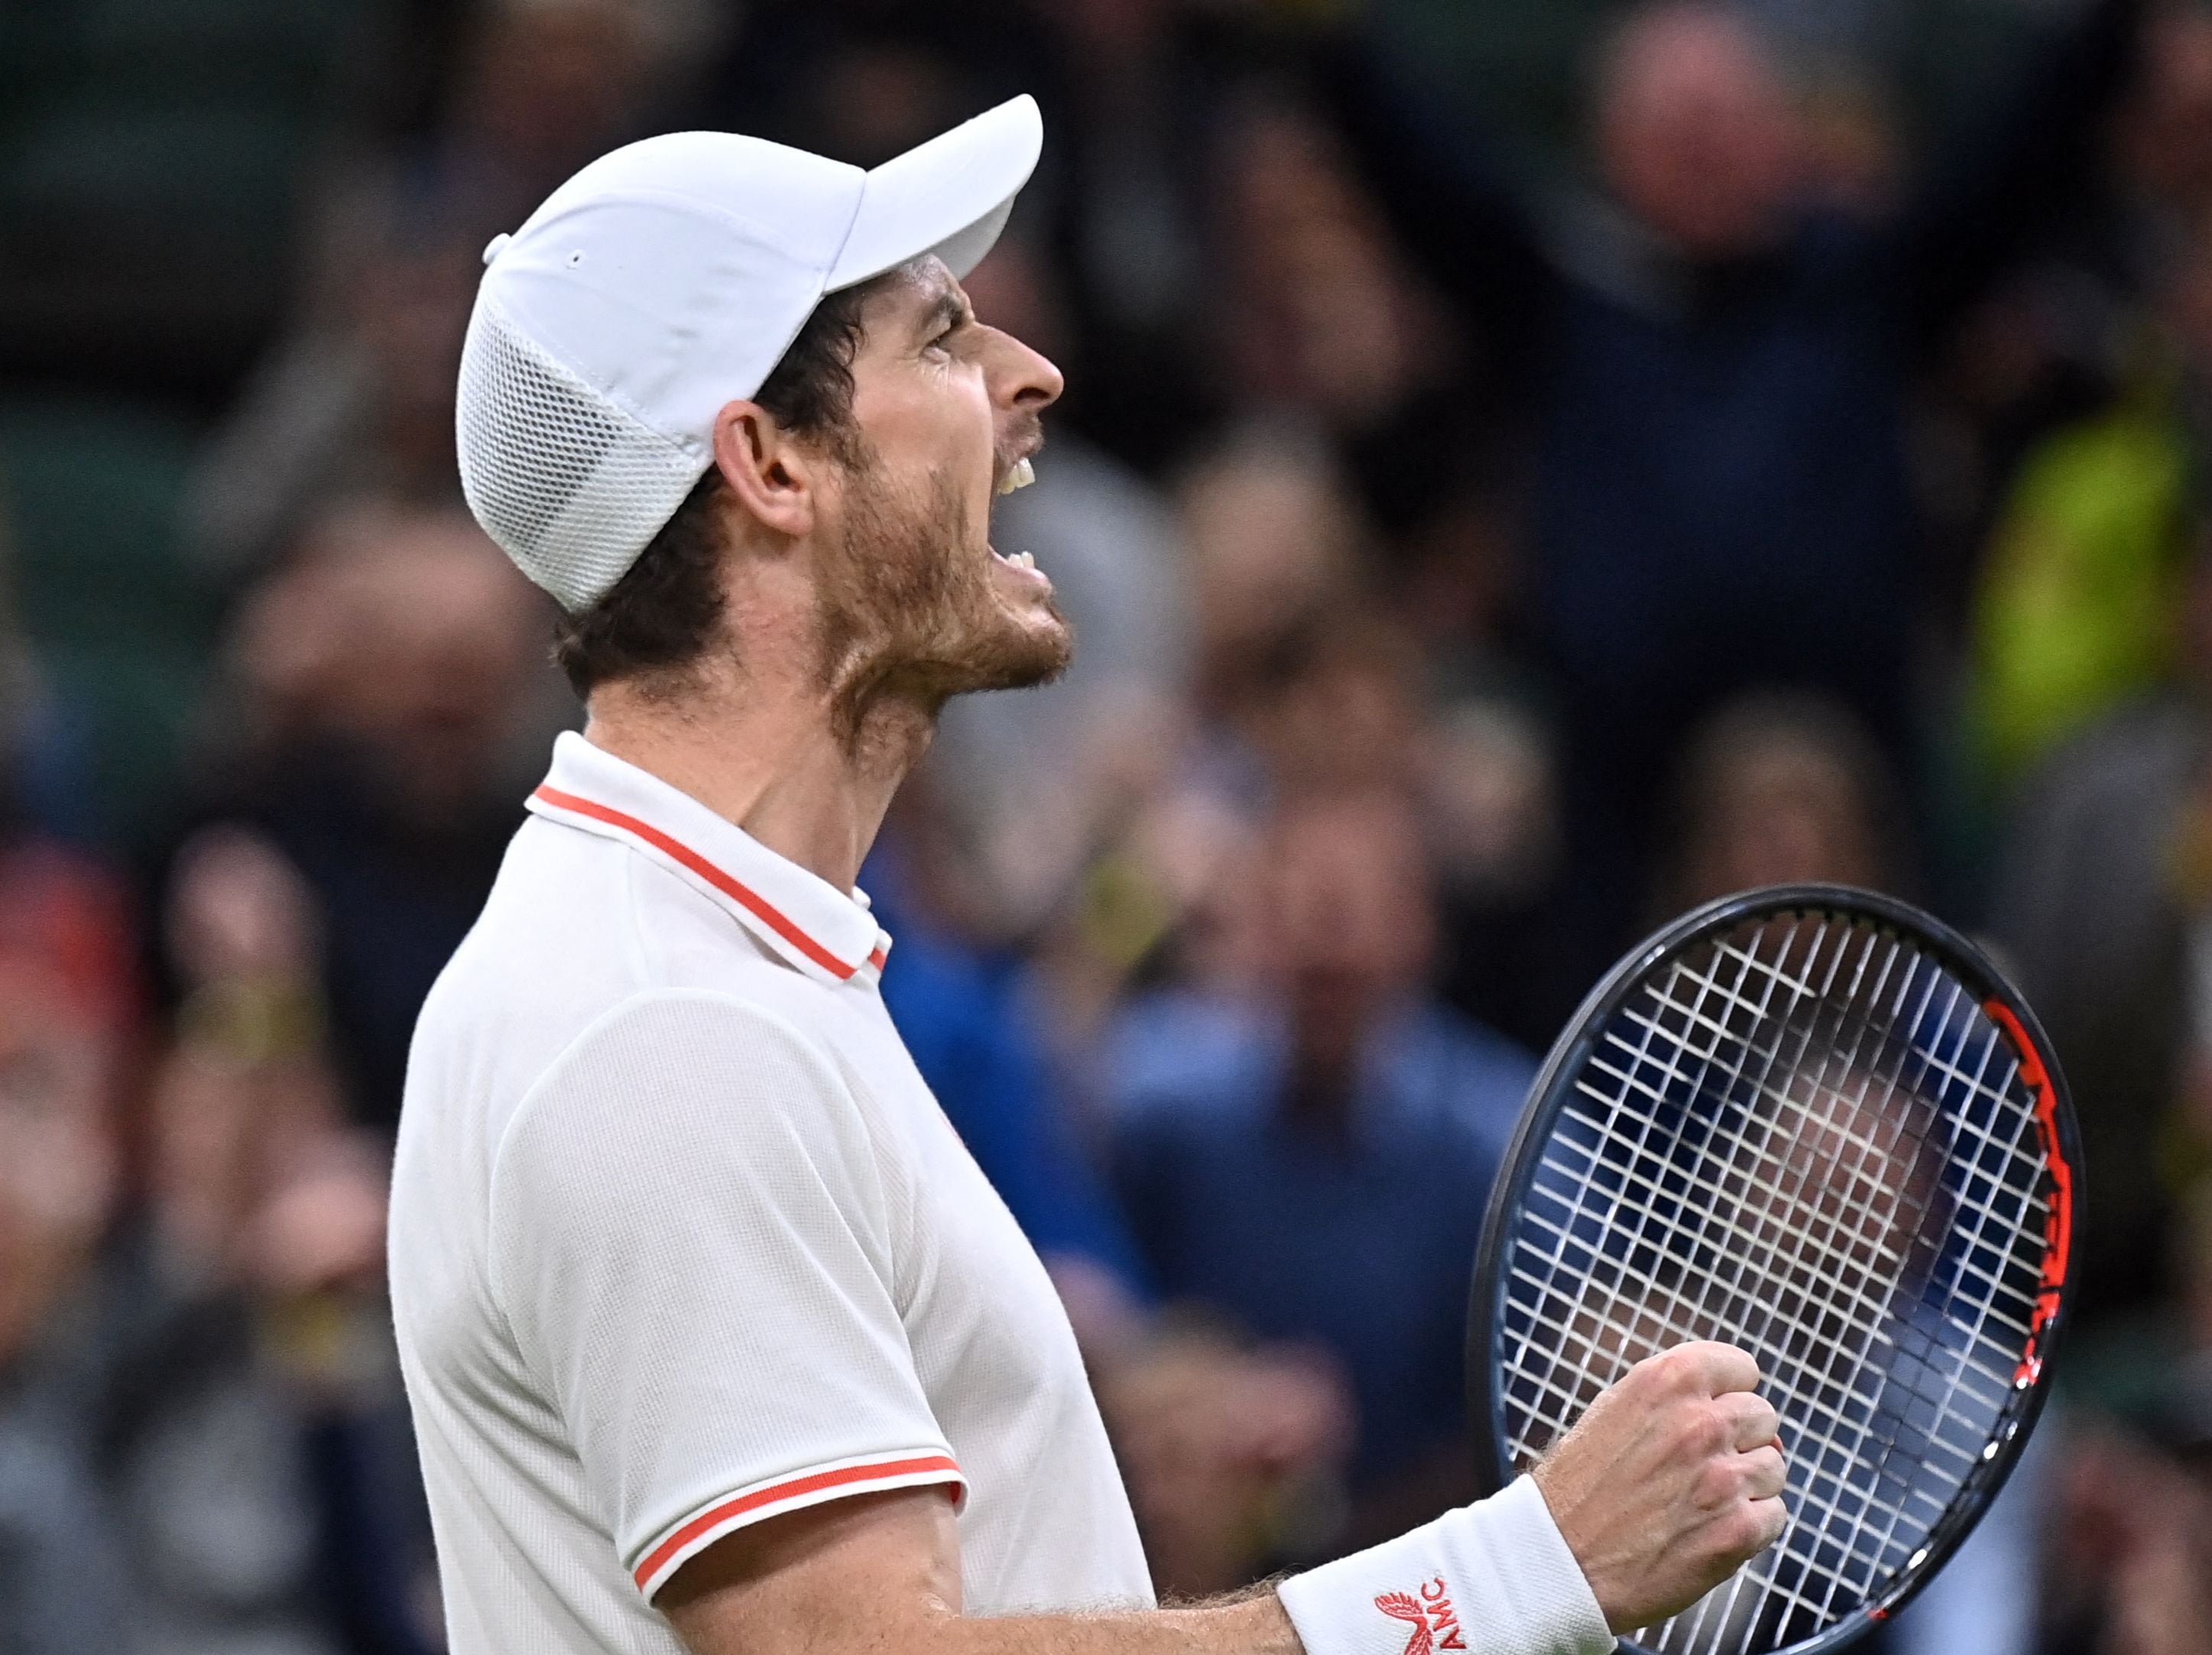 Andy Murray beat Oscar Otte under the roof on Centre Court